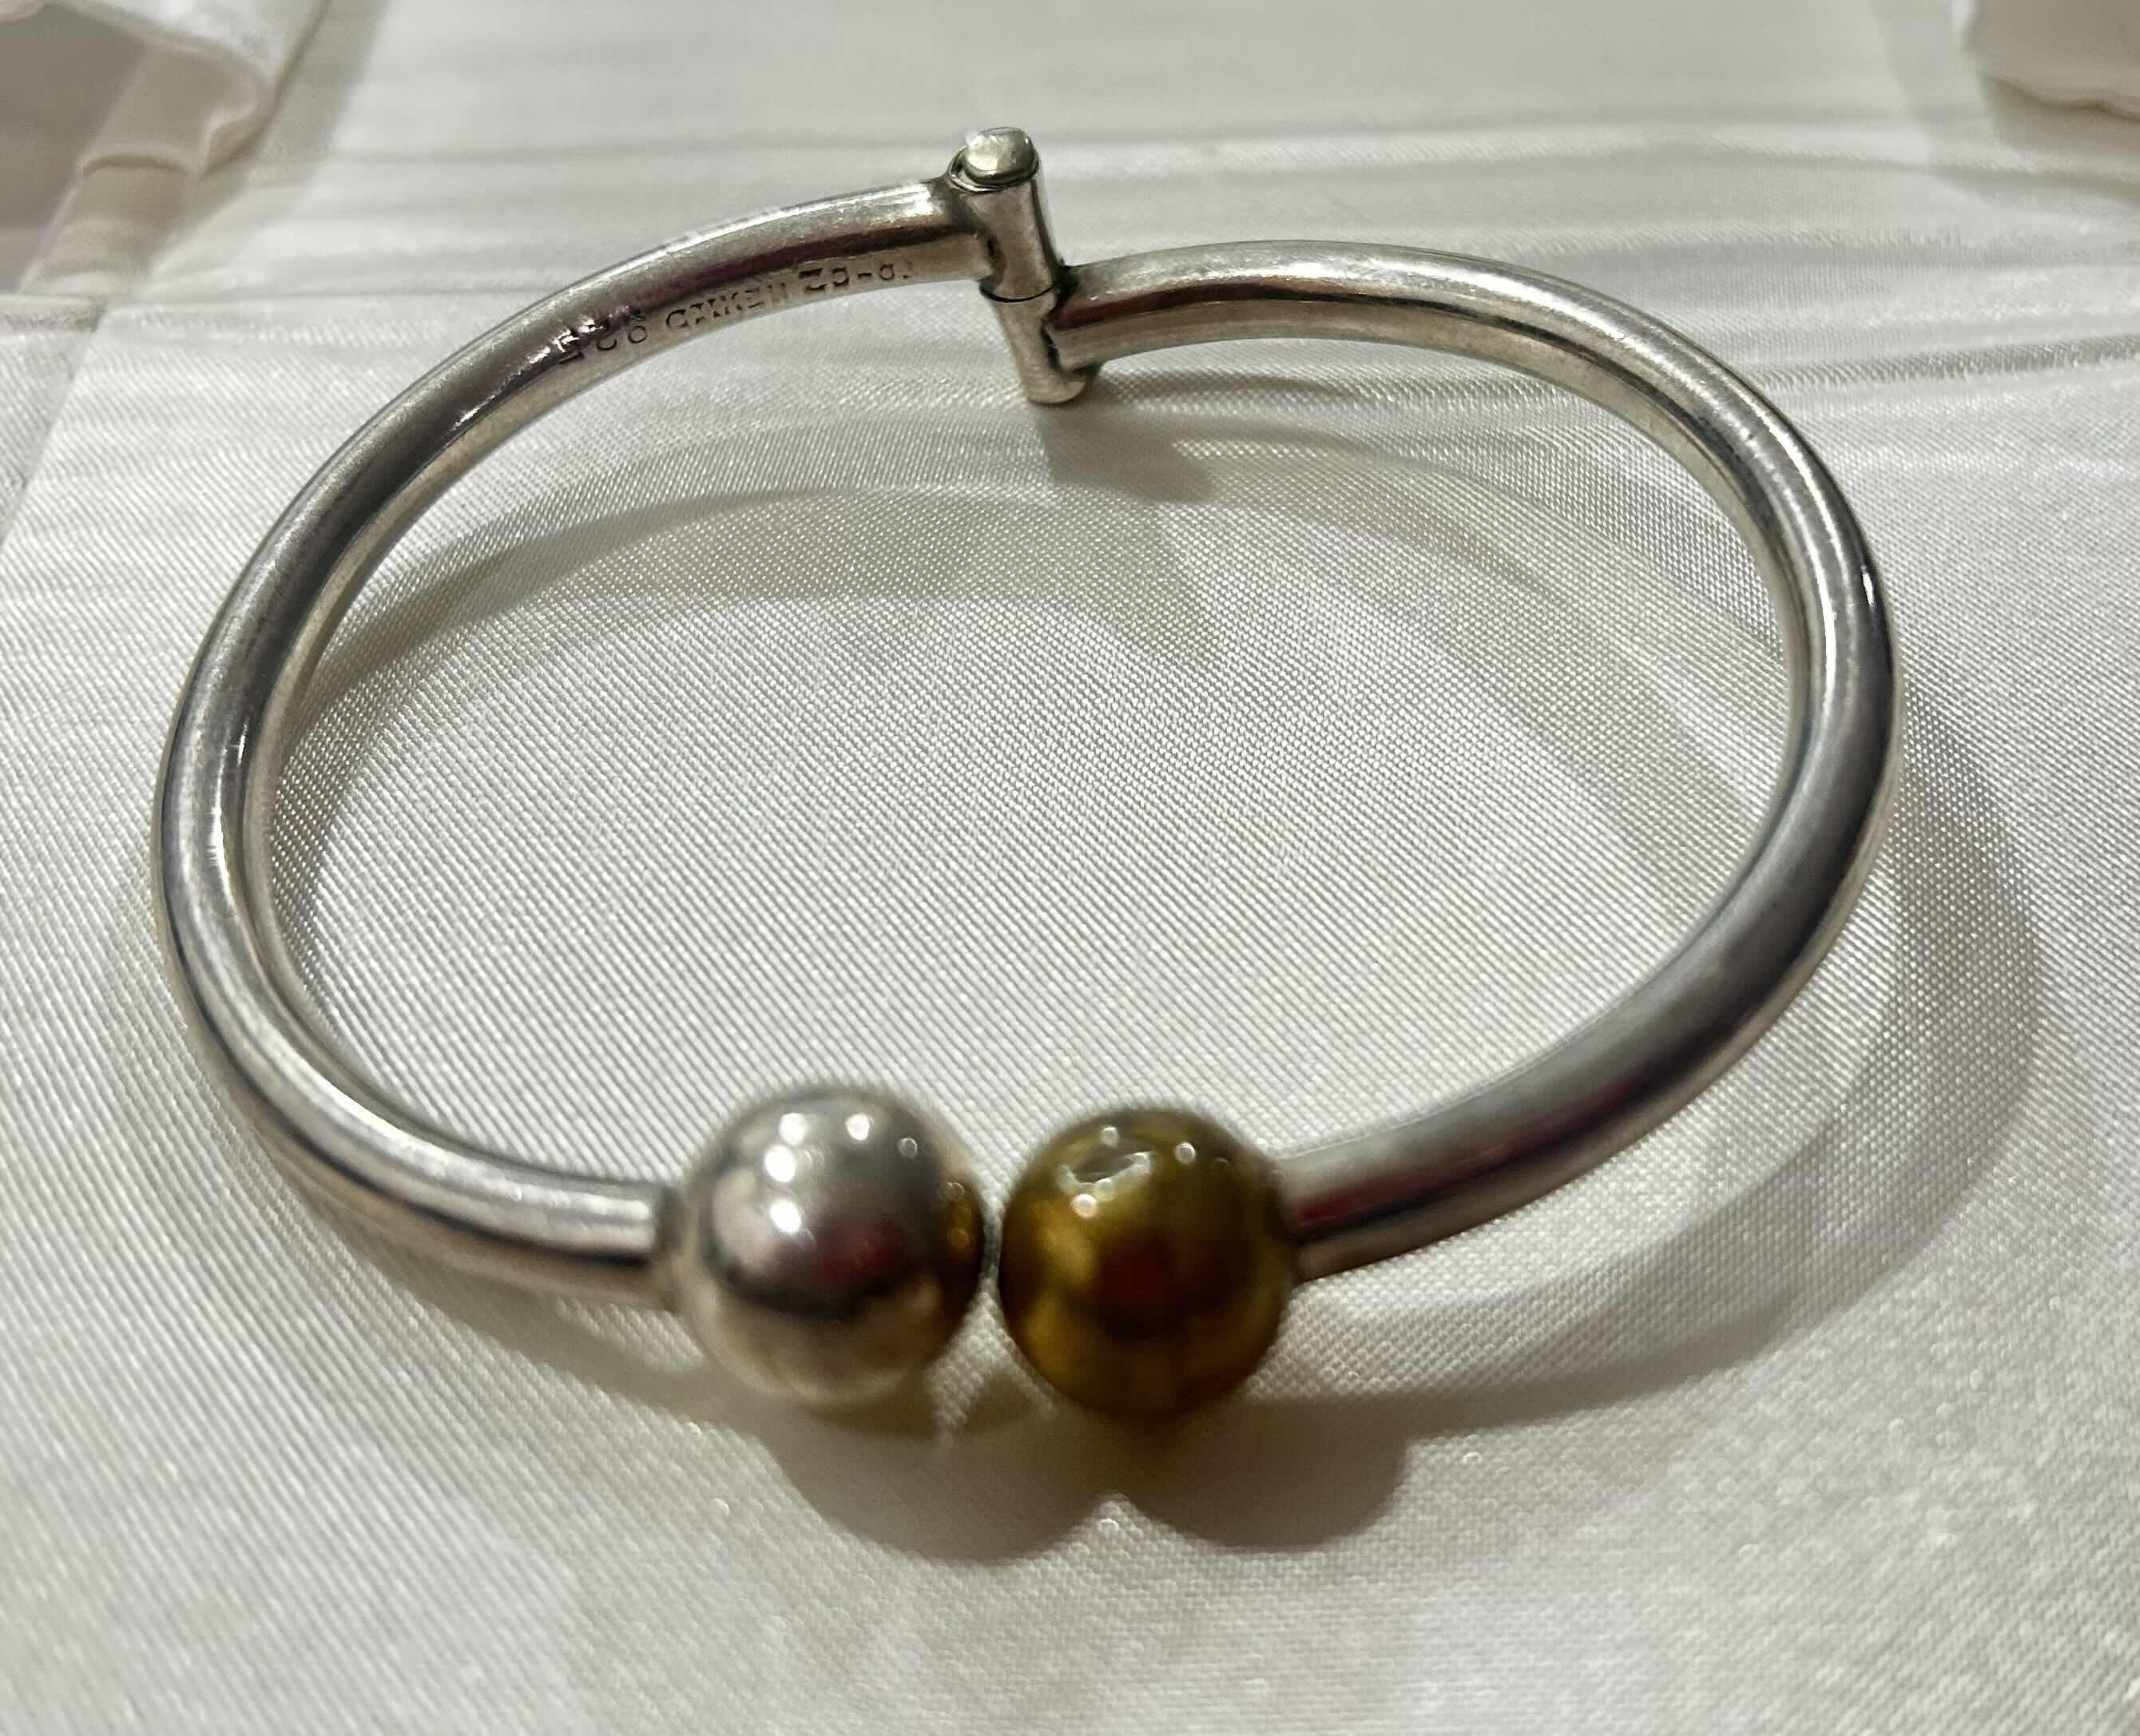 Photo 5 of FINE JEWELRY- .925 STERLING SILVER WITH 14K VINTAGE NINA RICCI NECKLACE, .925 BRACELET W BRASS BALL AND EARRINGS